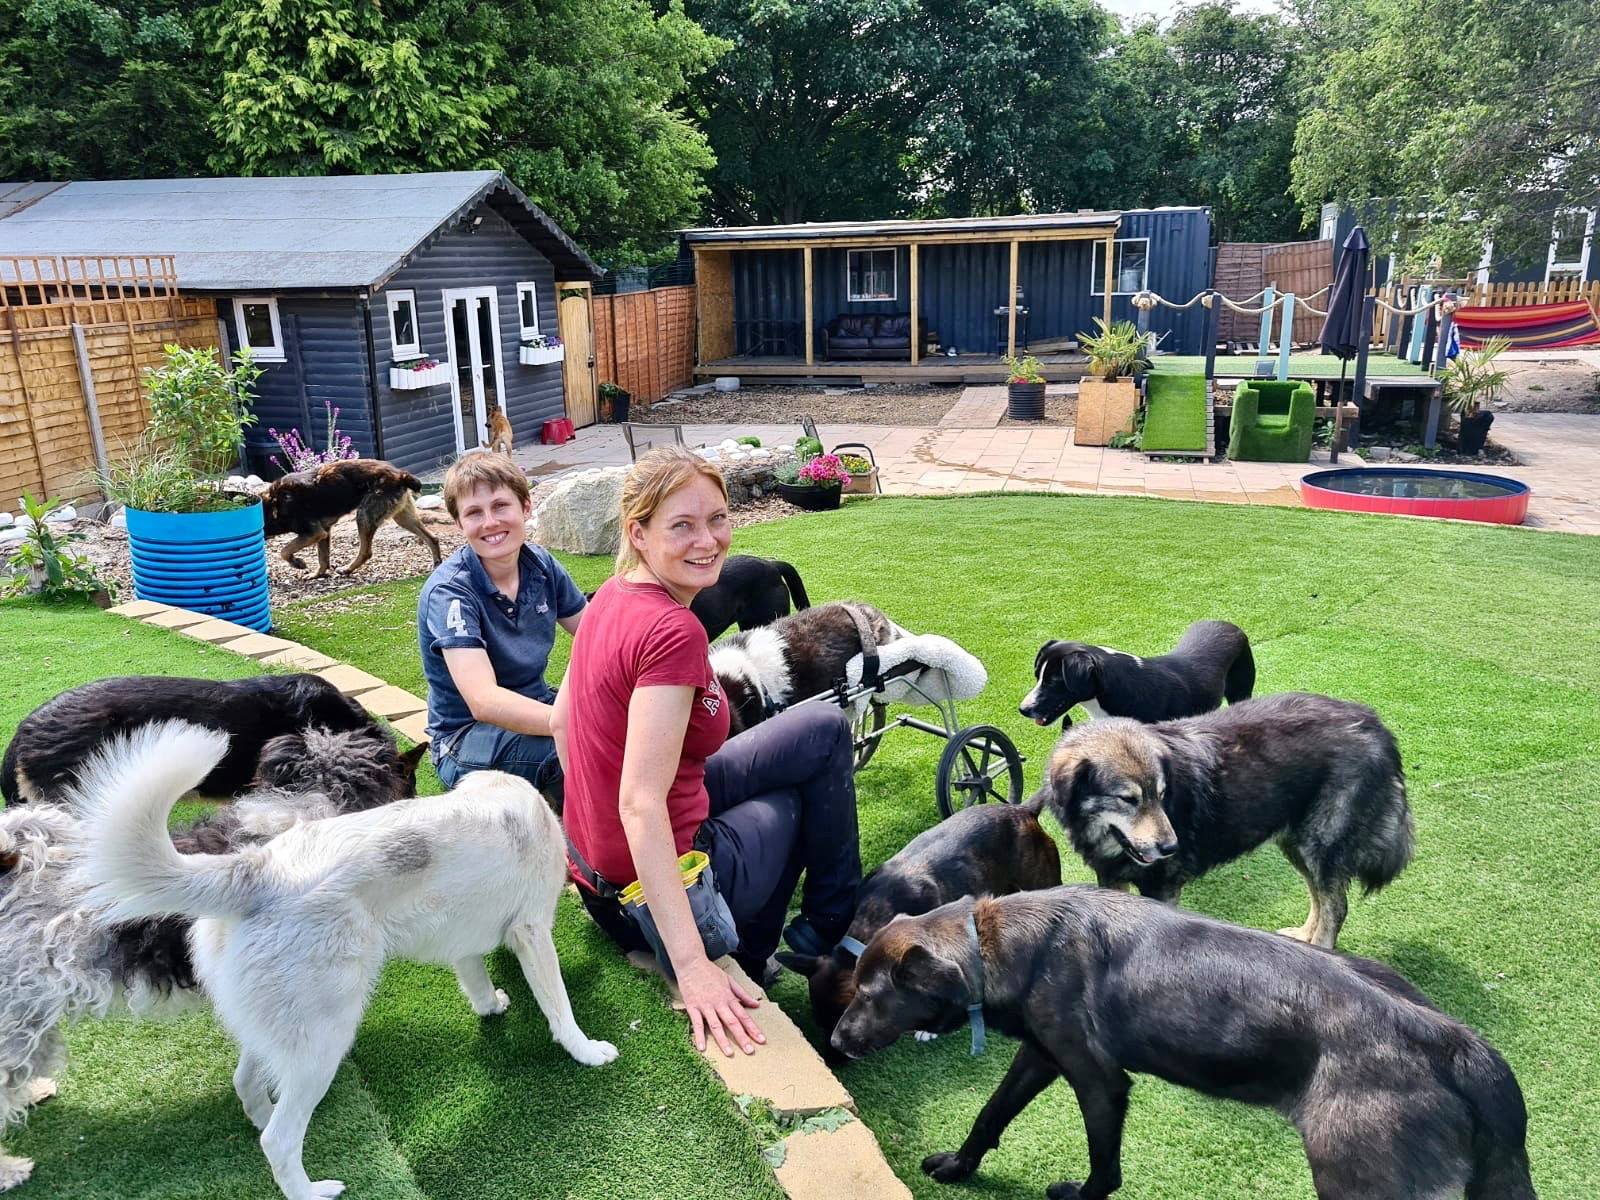 Dogs4Rescue needs your help to build new home for unwanted pooches, The Manc